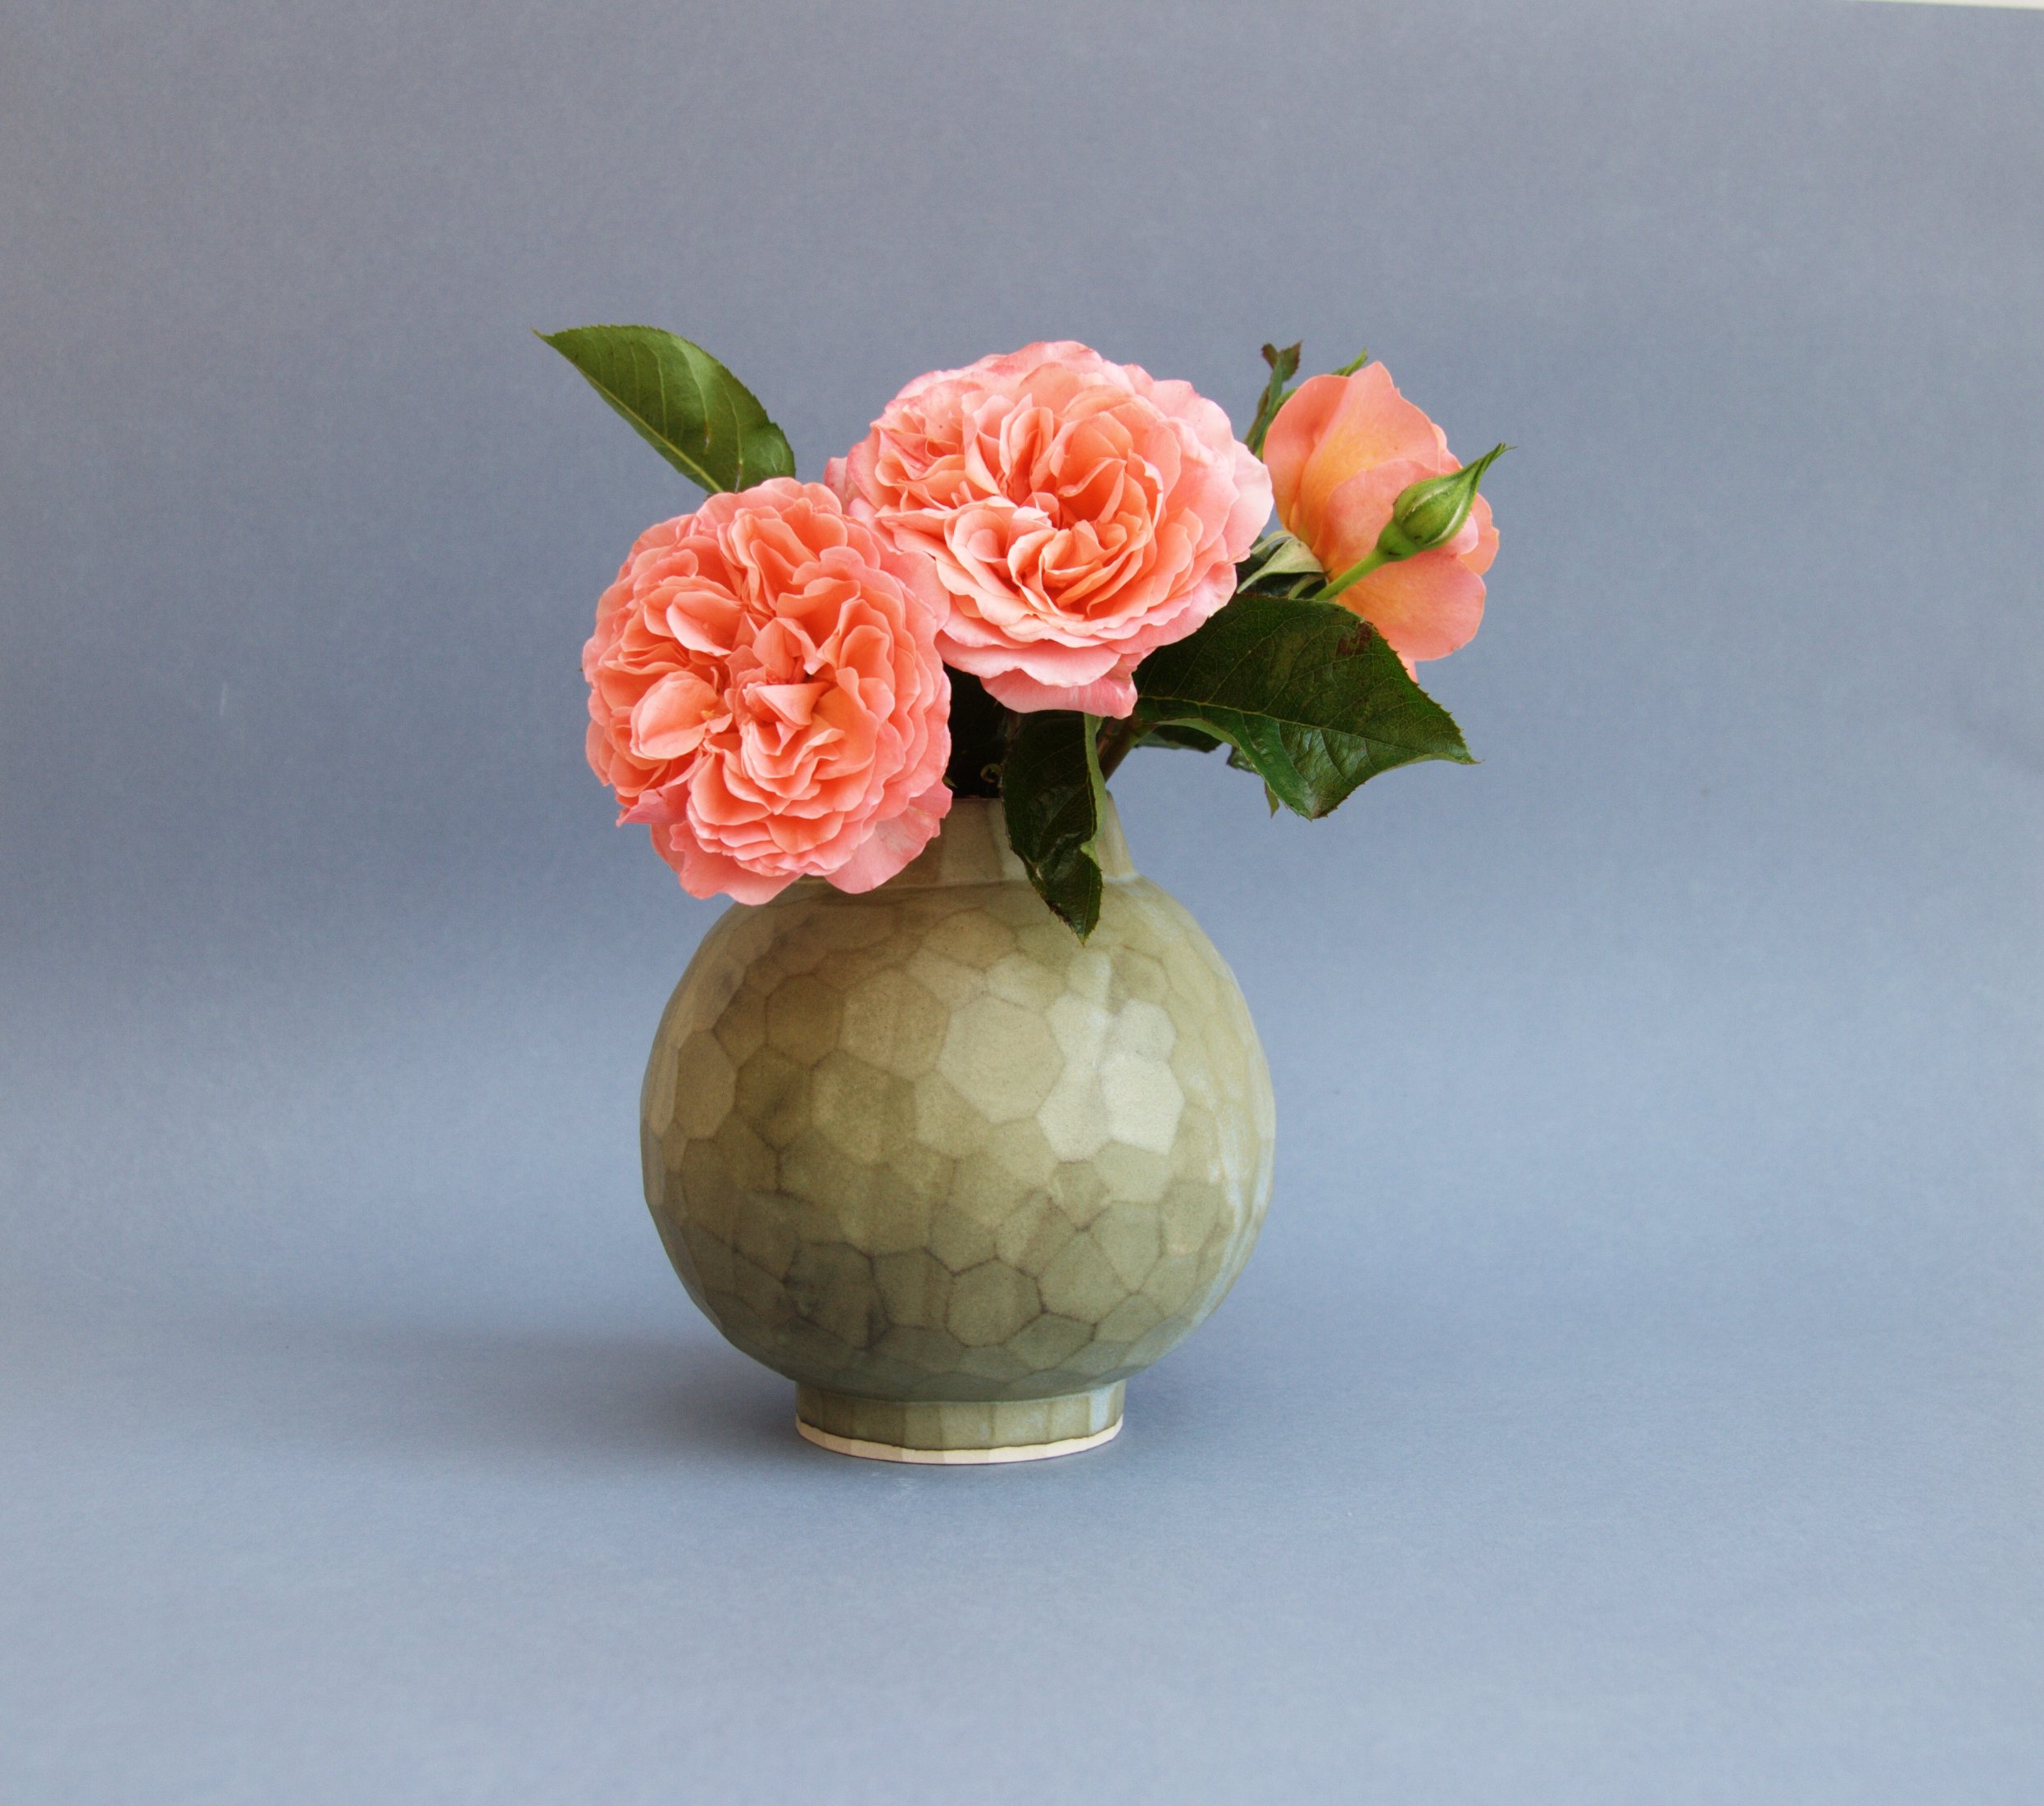 Green Brown Facetted Moon Jar with rose.jpg